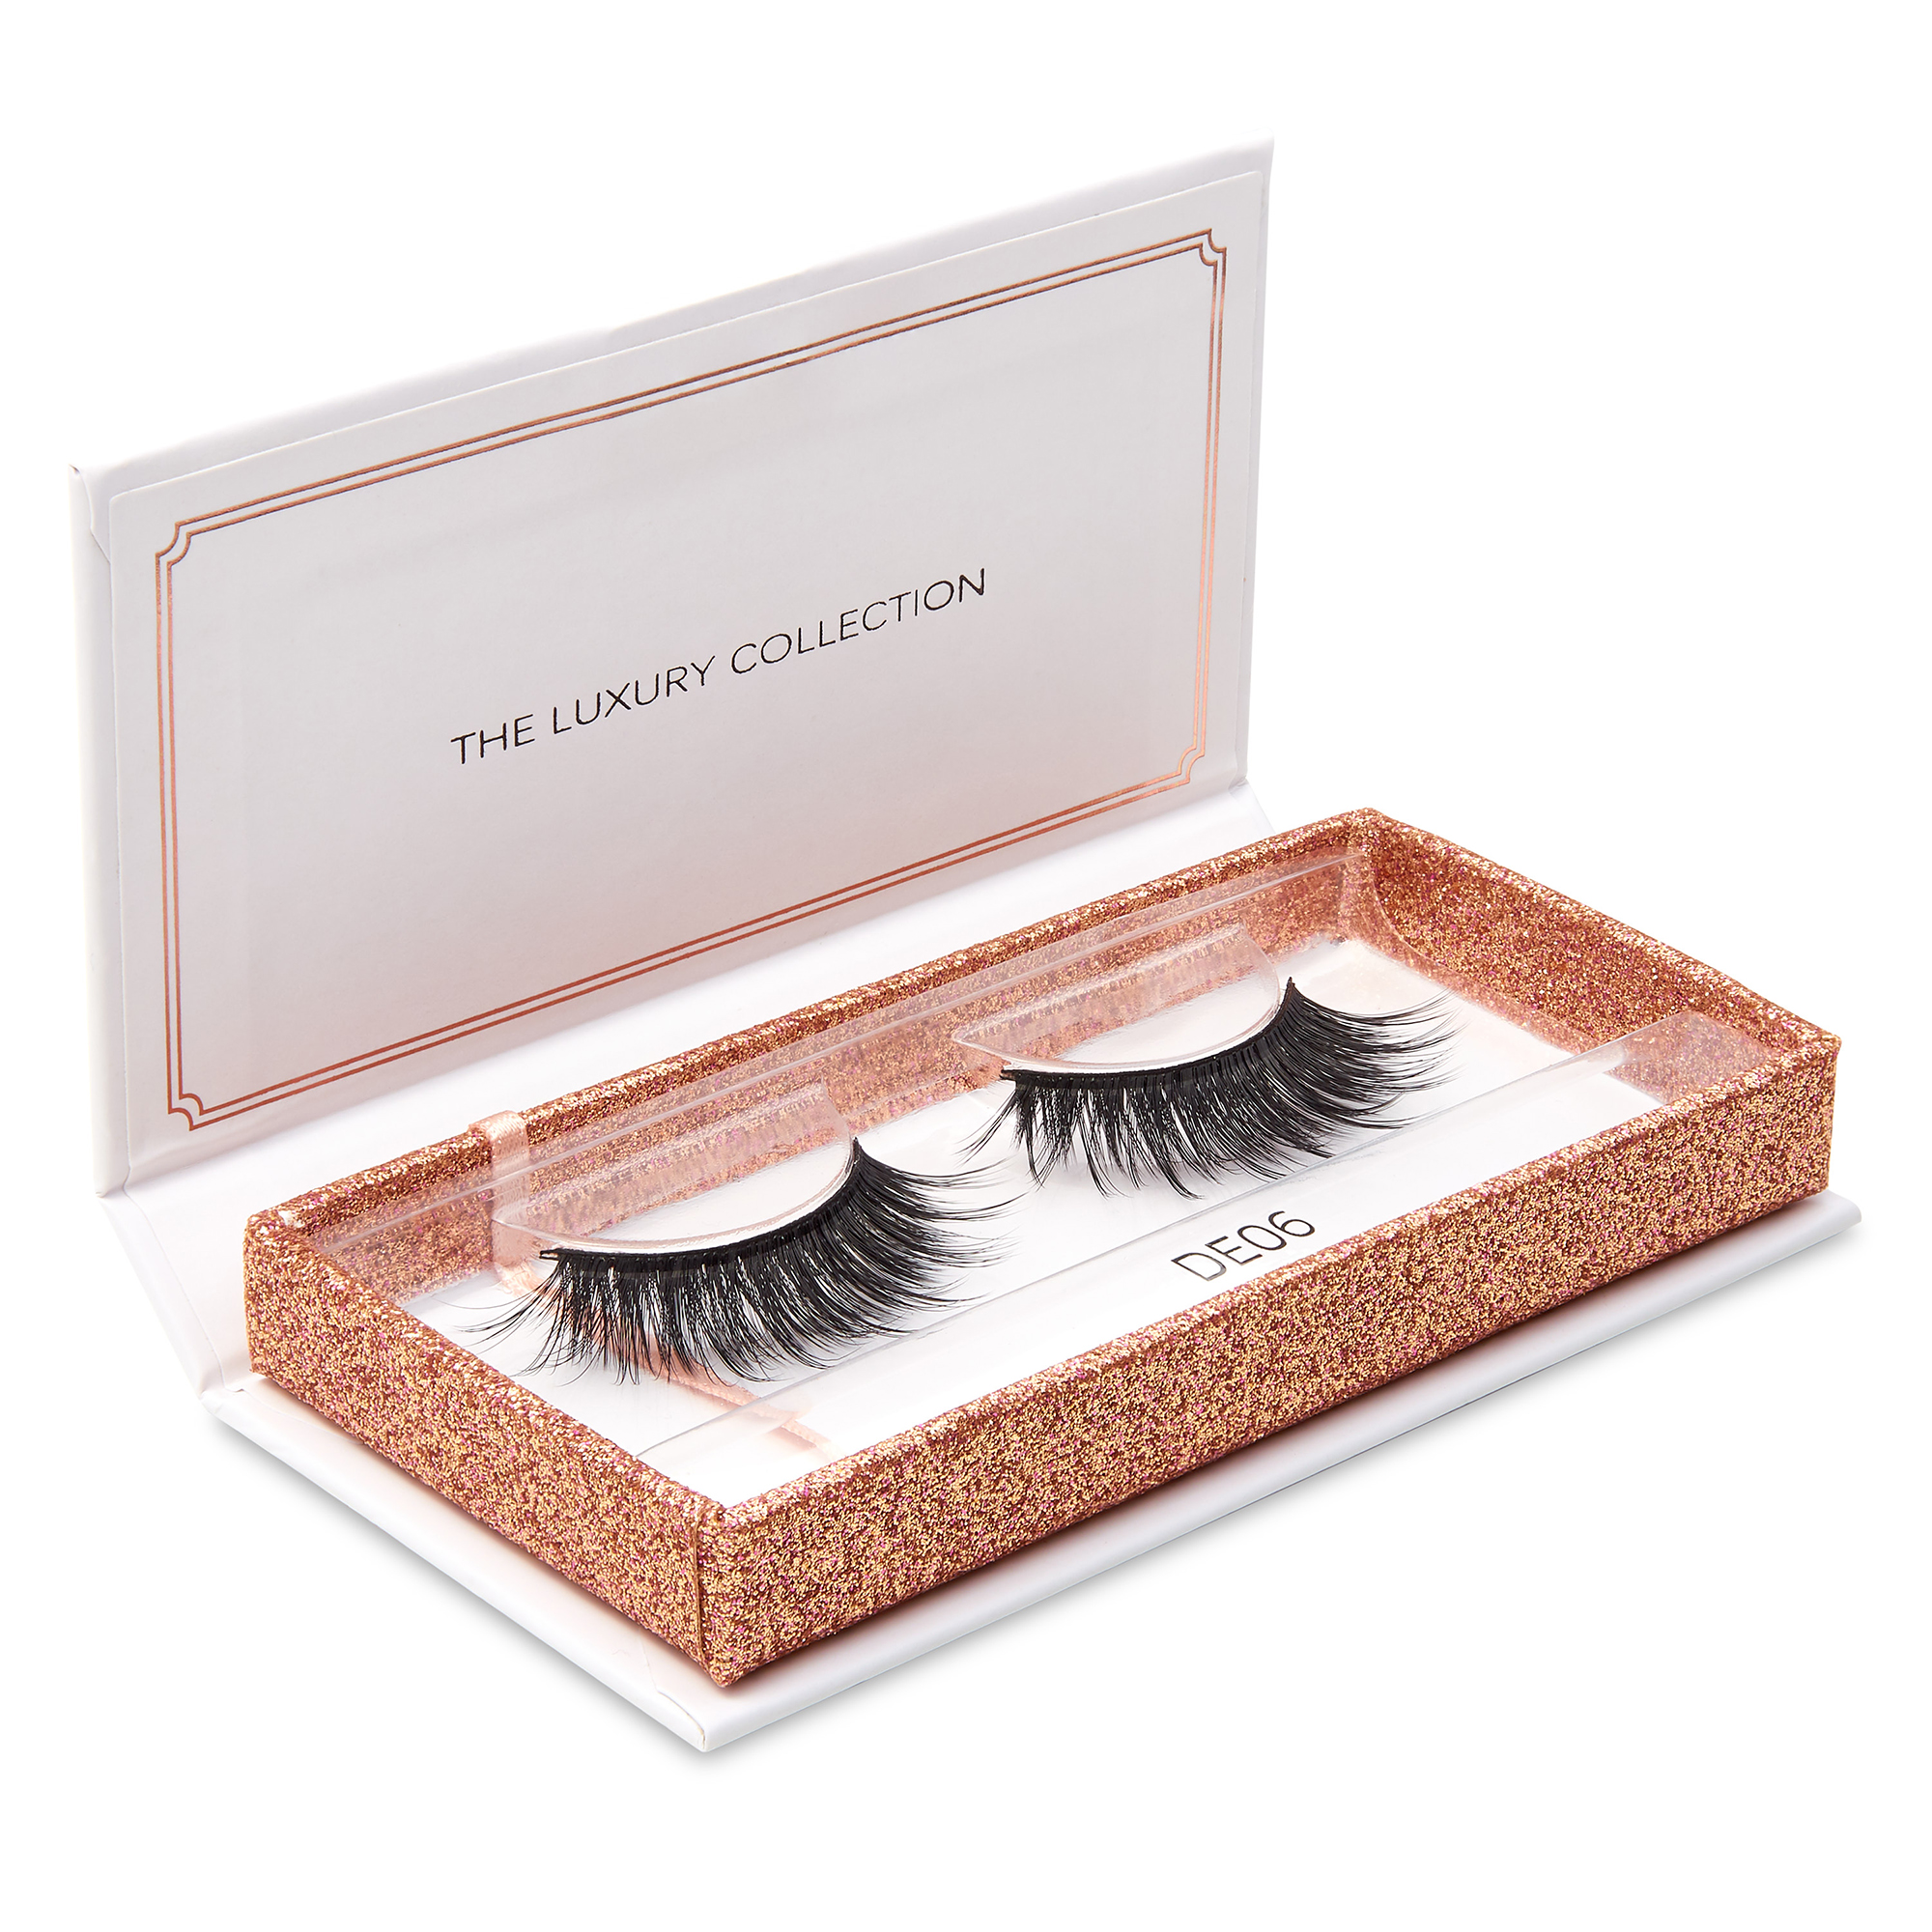 Eyelash packshot photography for website e-commerce and advertising usage by Ian Knaggs